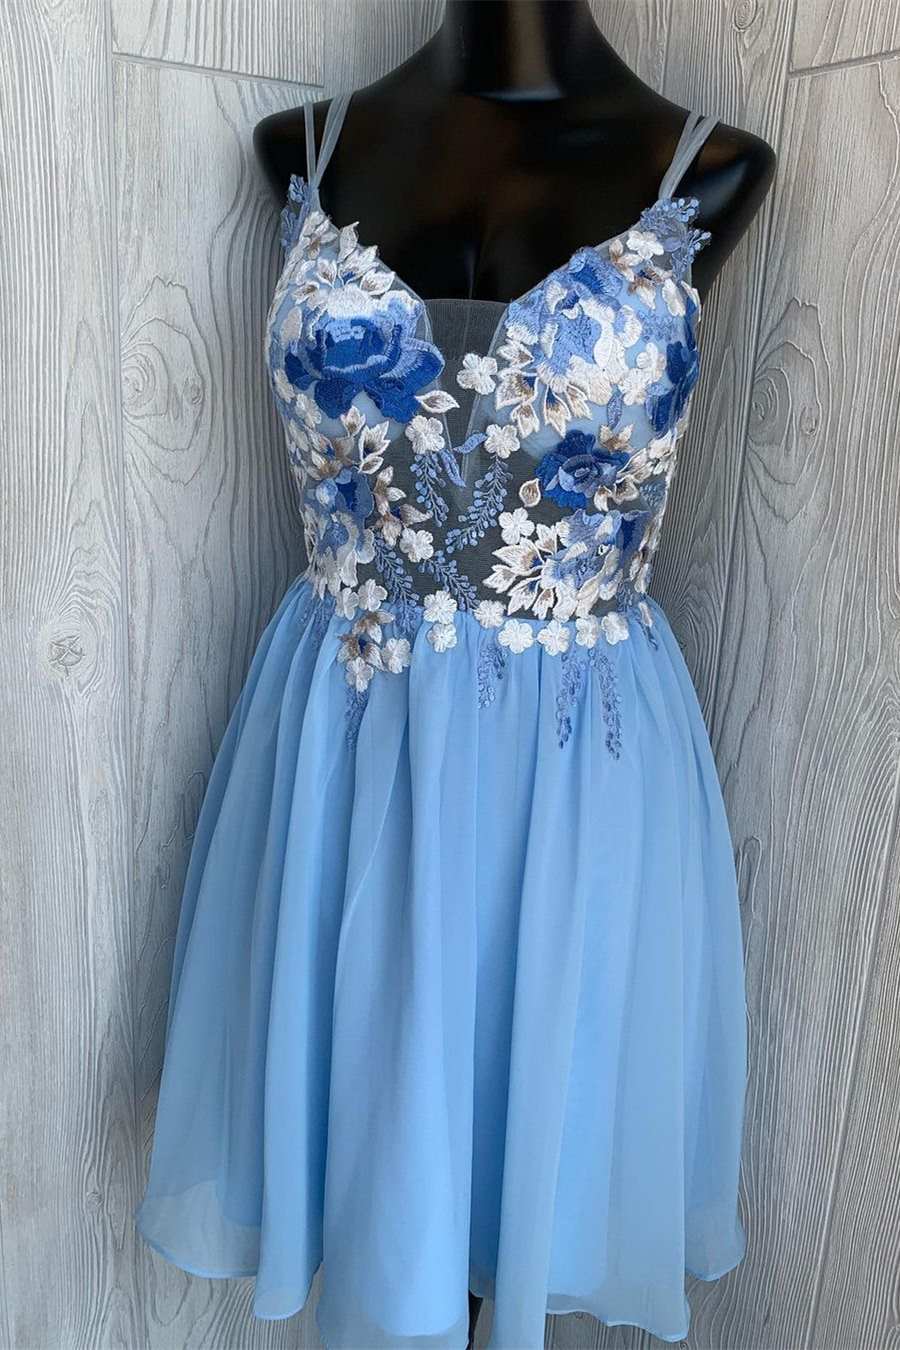 Prom Dresses For Teens, Blue Floral Embroidered A-line Short Homecoming Dresses